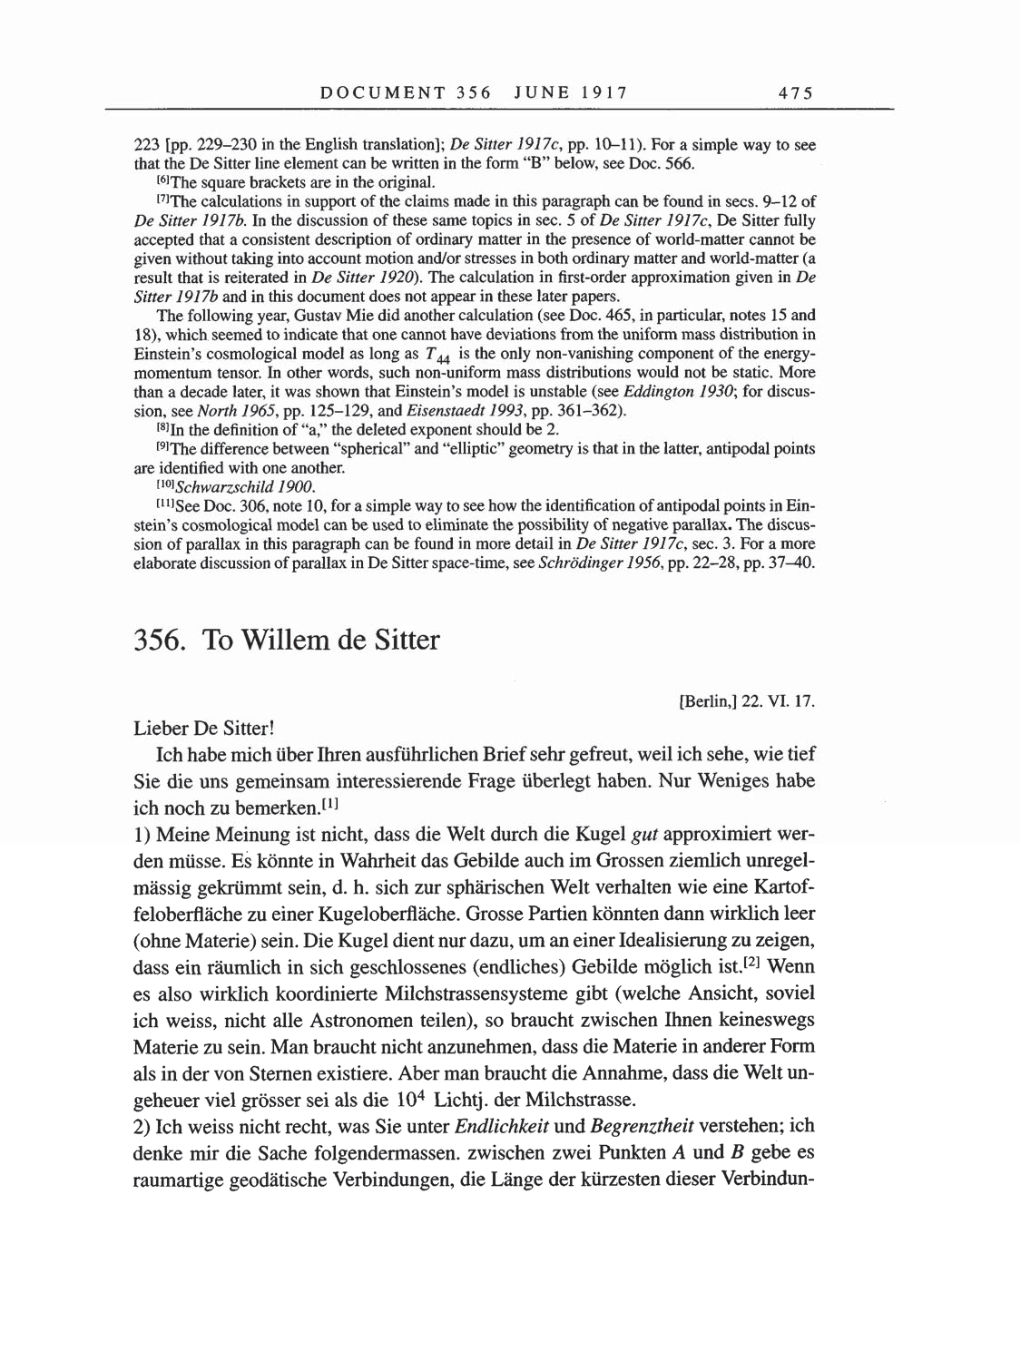 Volume 8, Part A: The Berlin Years: Correspondence 1914-1917 page 475